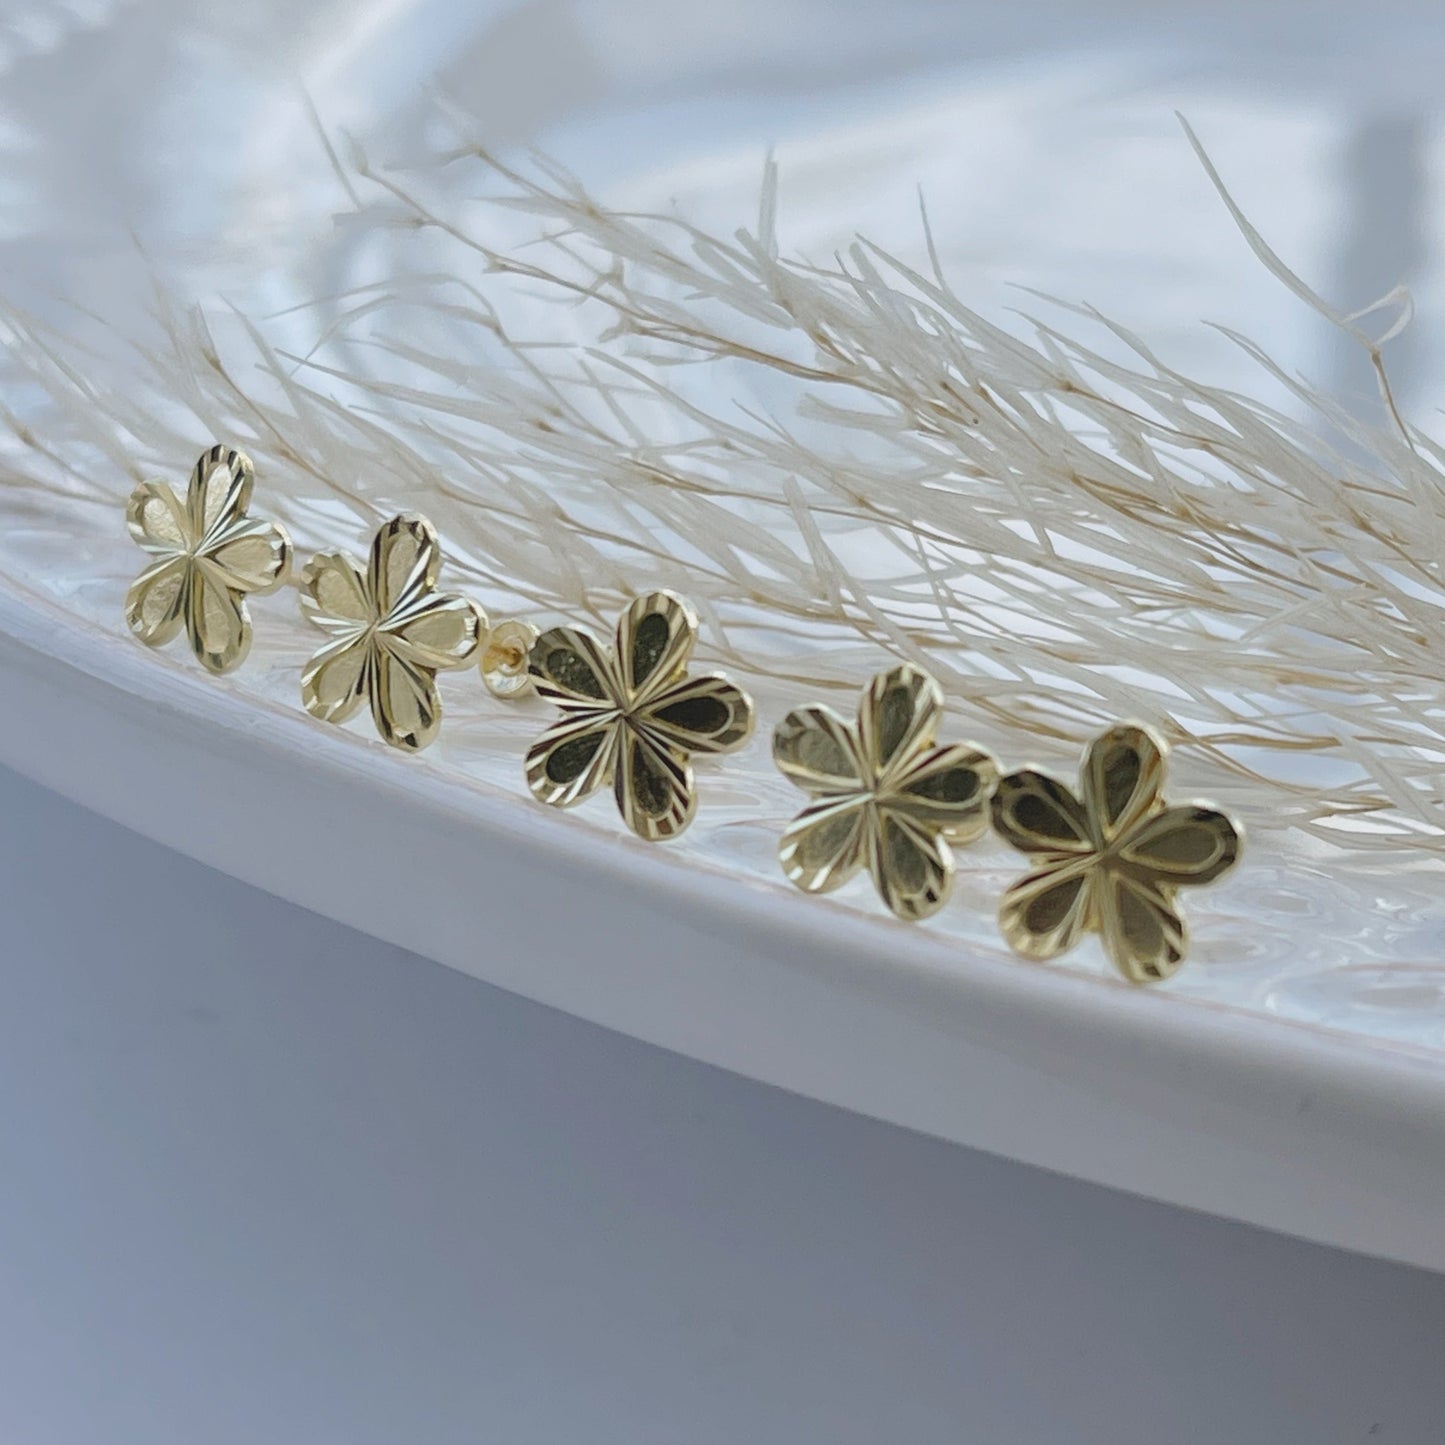 Dainty and delicate 10k gold flower stud earrings. These tiny, minimalistic earrings are perfect for everyday wear. They would also make a wonderful gift for the bridal party or flower girl!